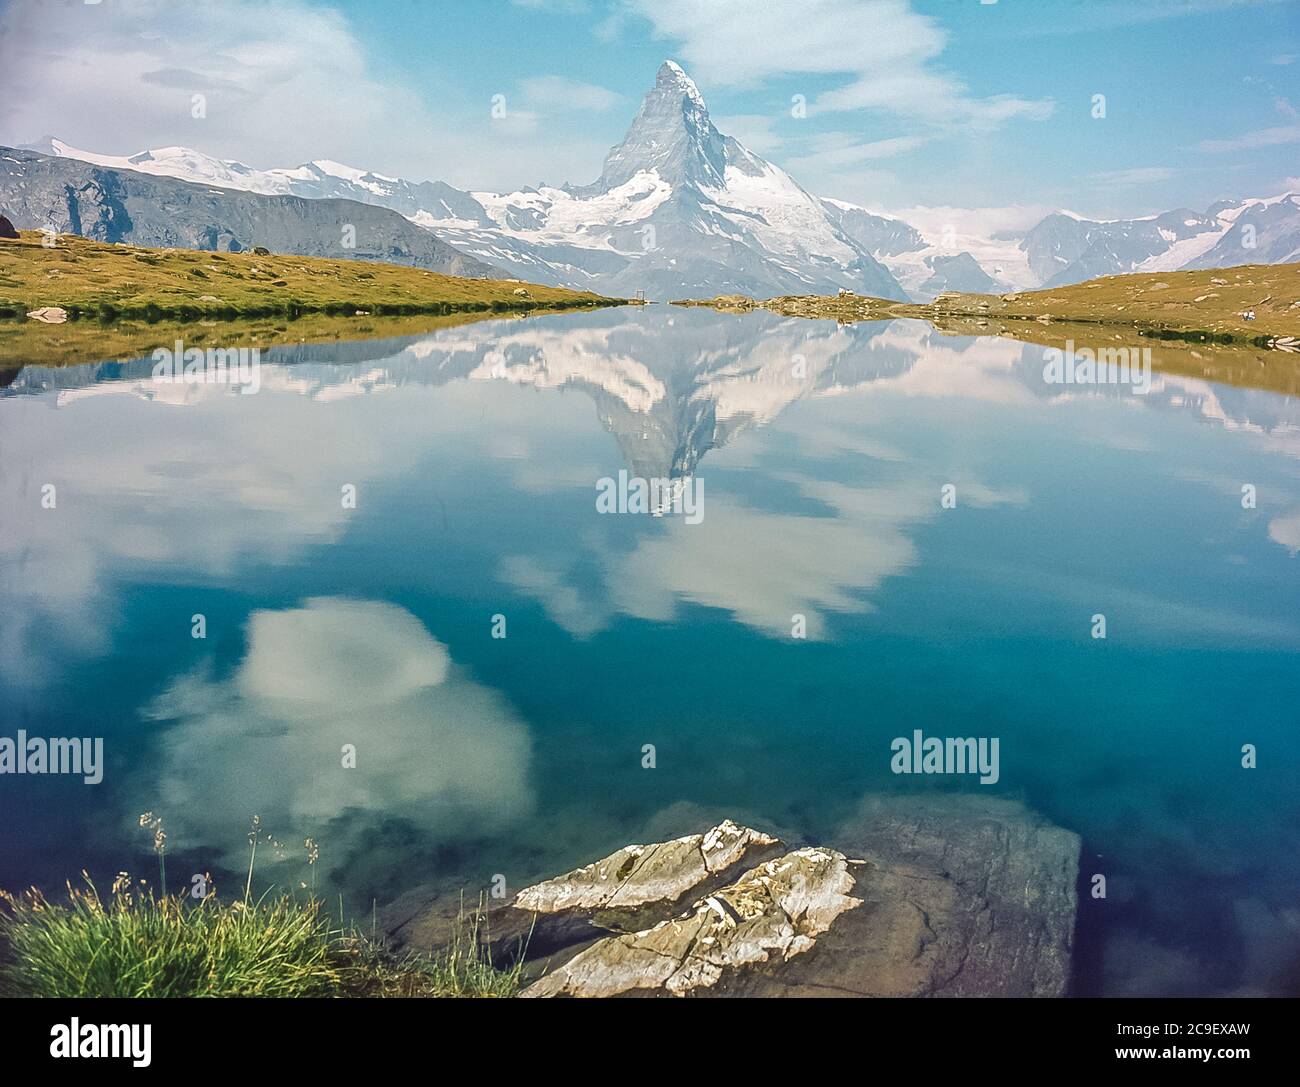 This is the famous Matterhorn mountain as seen from the alpine lake of Stelisee near the Fluhalp Hut refuge high above the Swiss mountain holiday resort town of Zermatt in the Swiss Canton of Valais as it was in 1986 Stock Photo